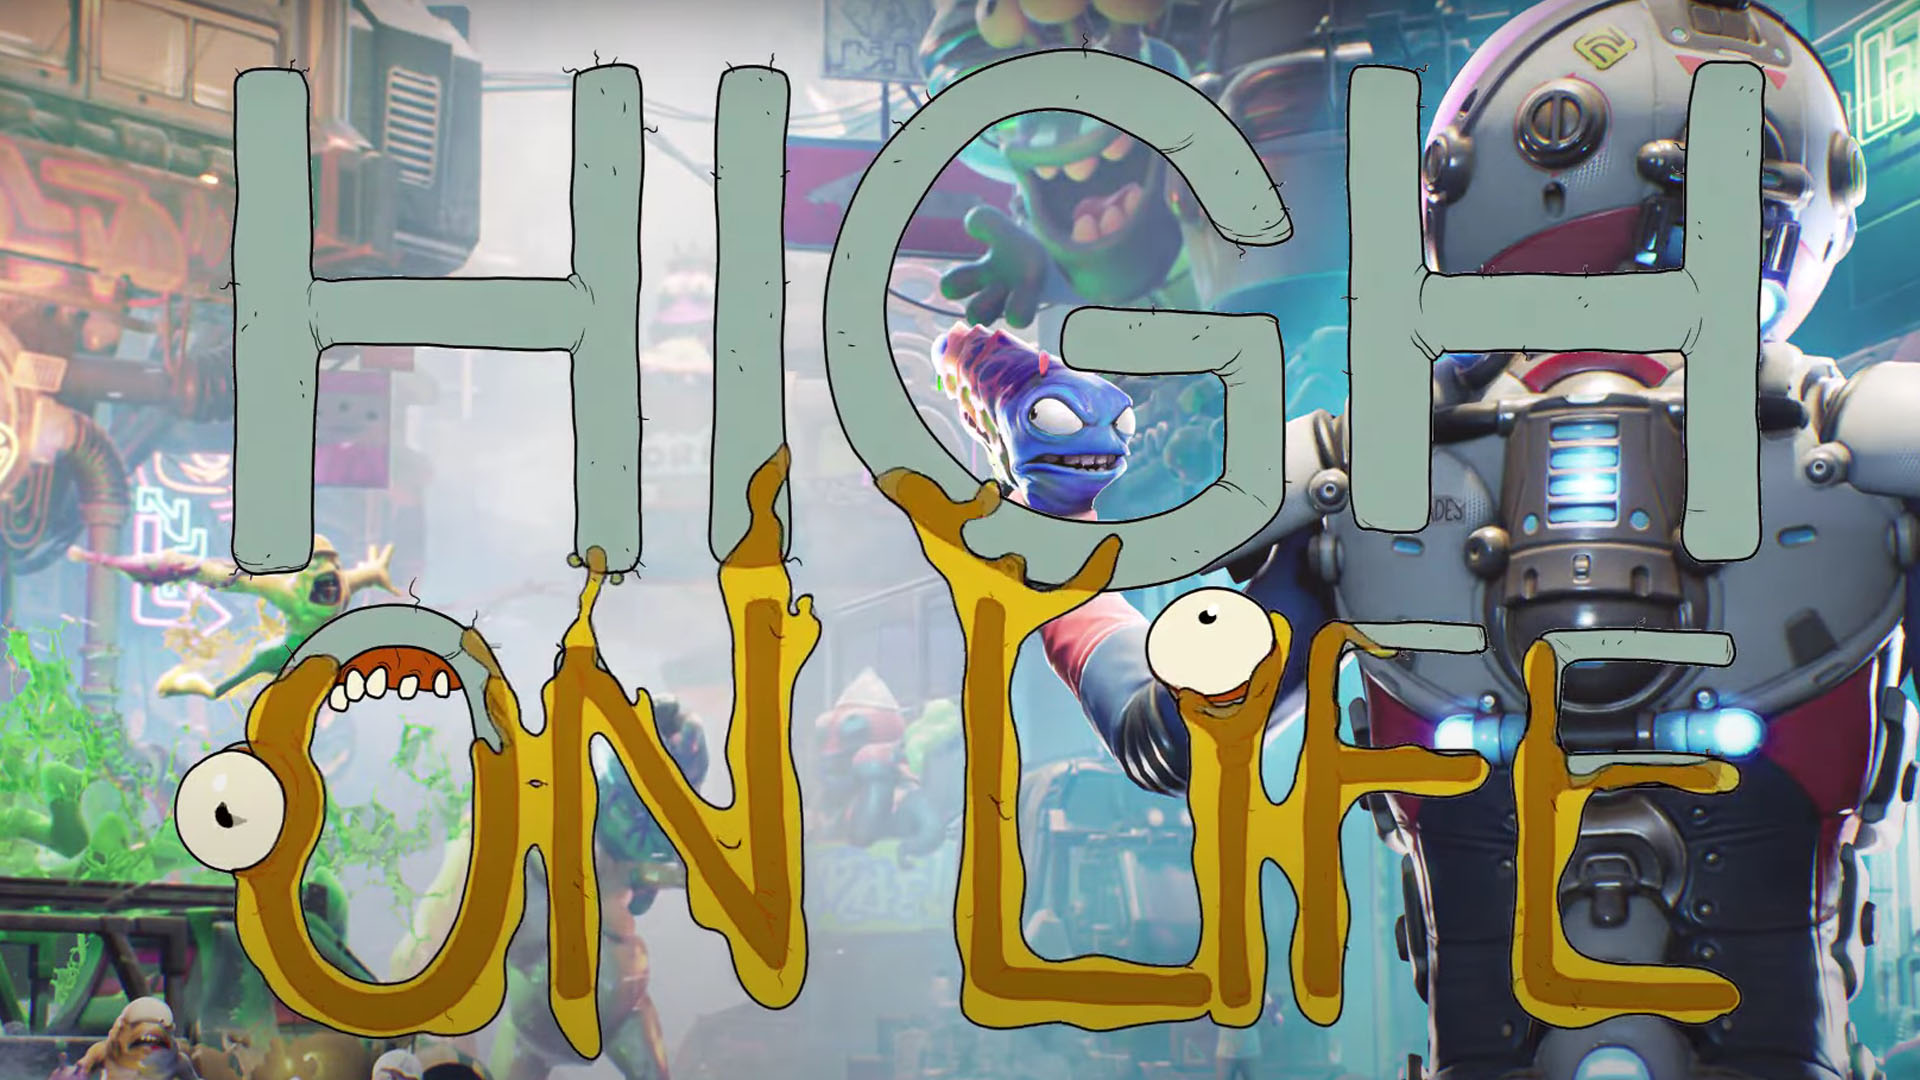 High On Life release date, trailers, gameplay & more